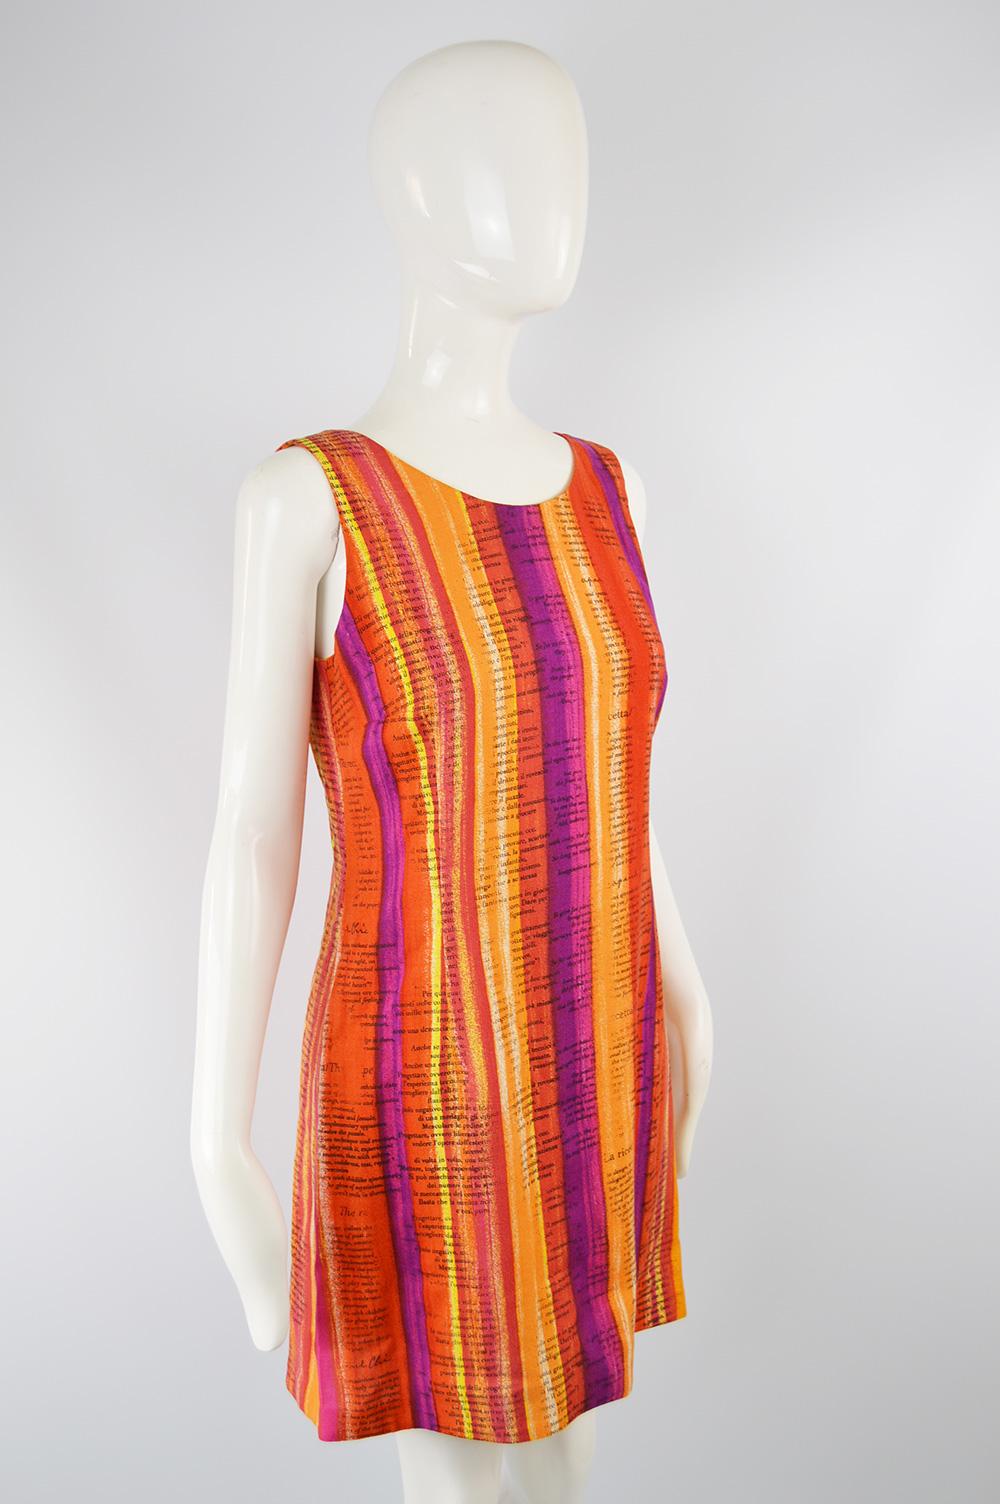 Moschino Cheap & Chic 'Recipe' Watercolor Stripe Print Rayon Dress, 1997 In Excellent Condition For Sale In Doncaster, South Yorkshire